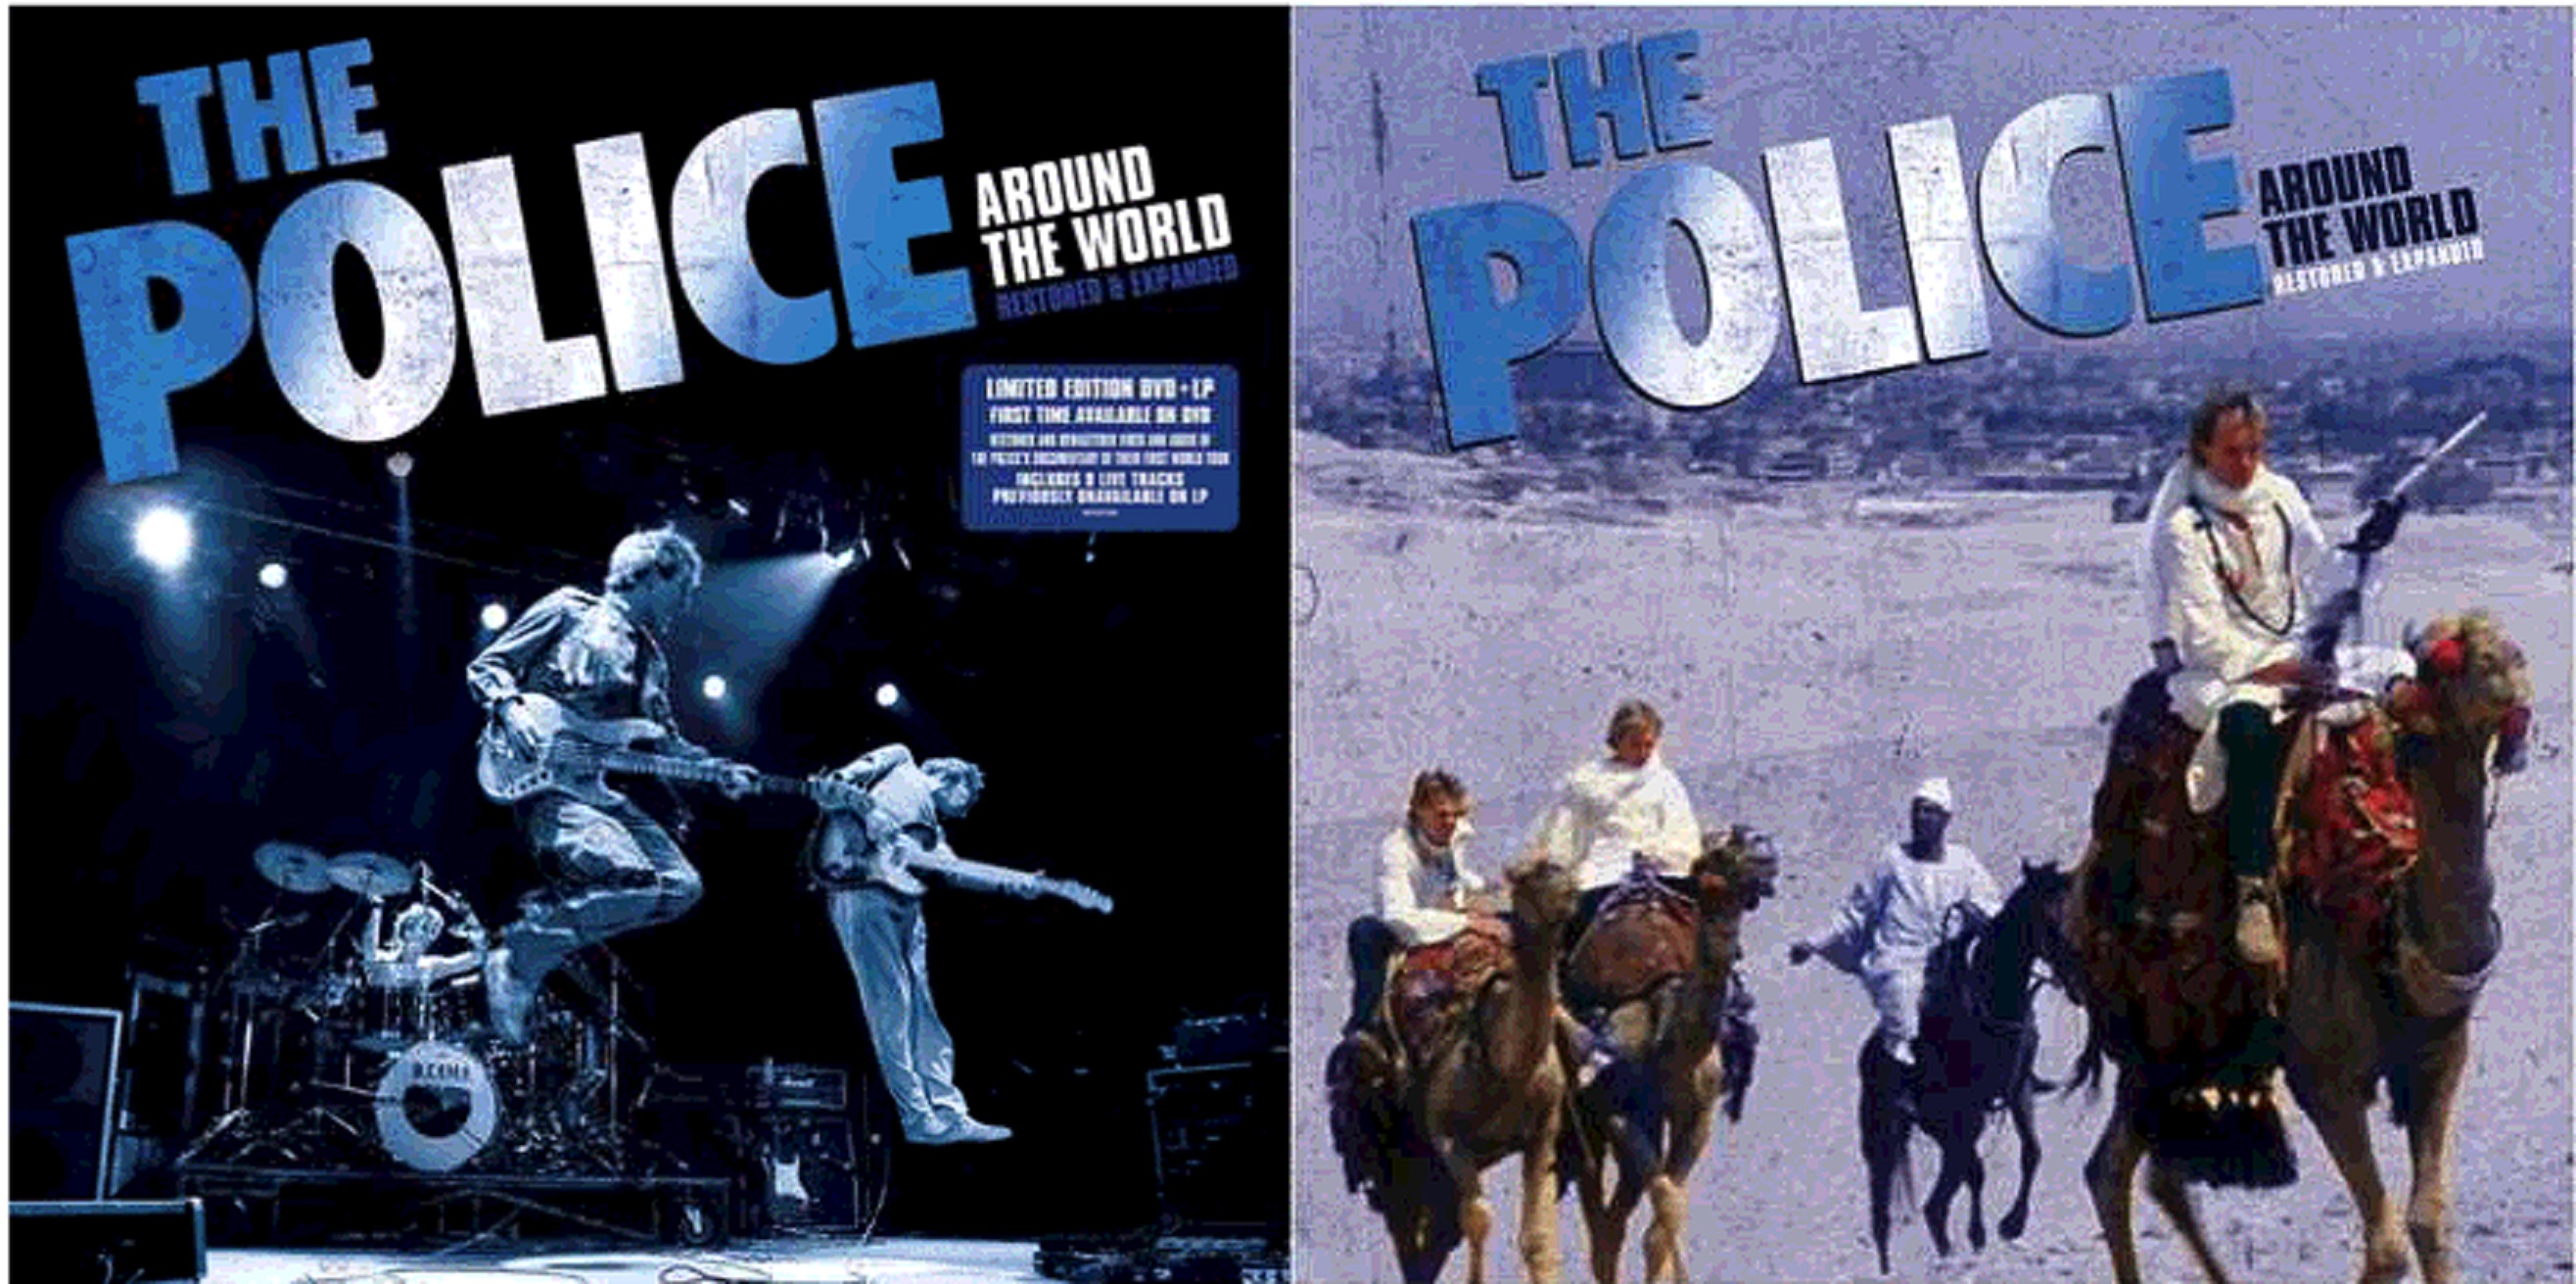 The Police Around The World Restored & Expanded